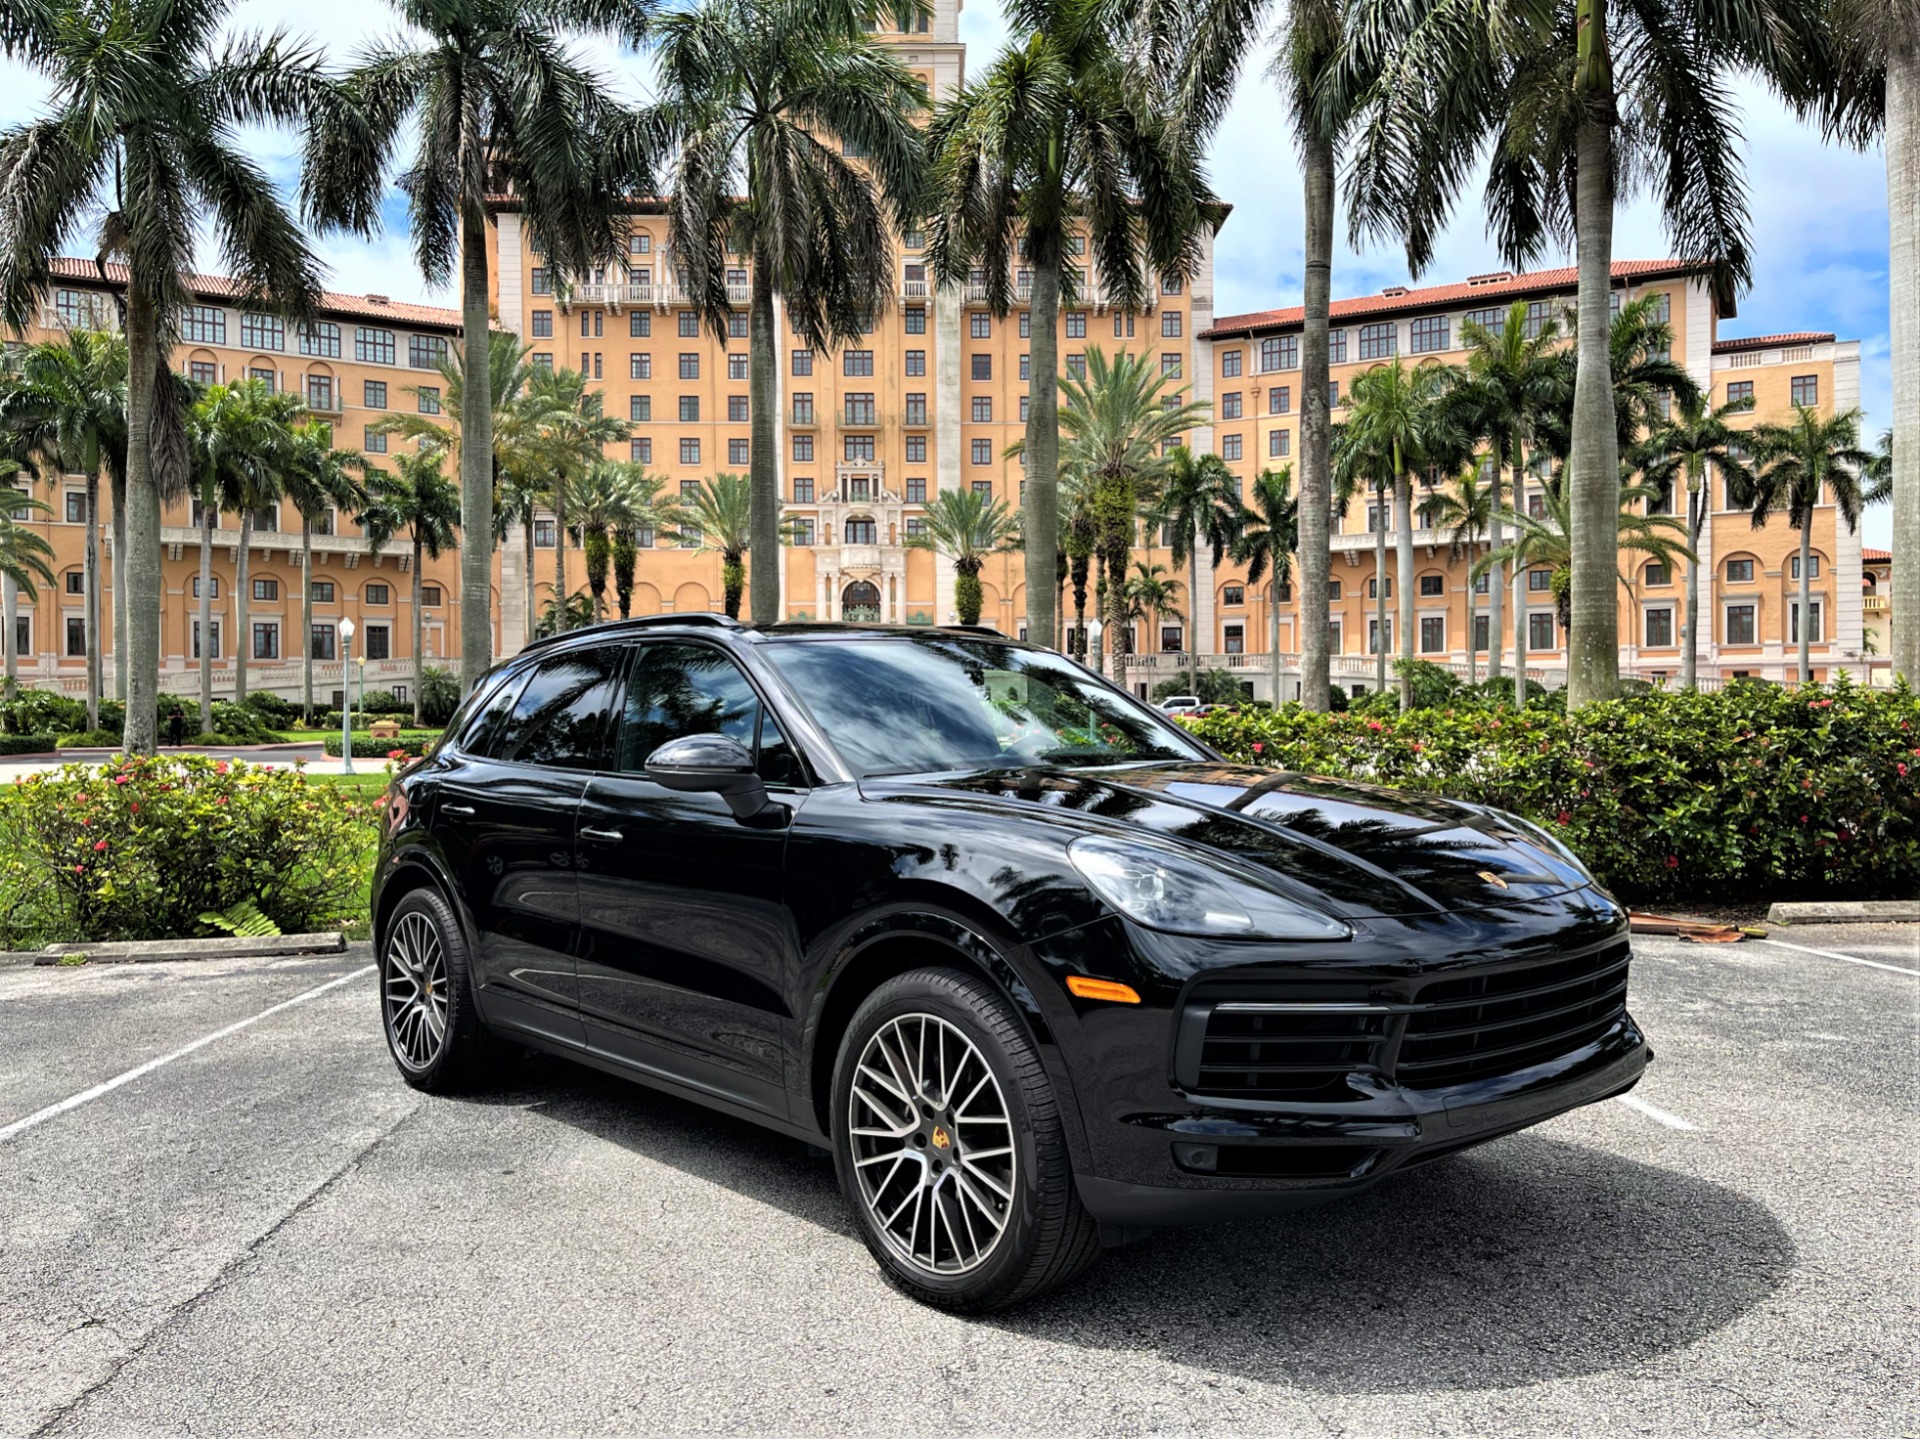 Used 2020 Porsche Cayenne for sale $78,850 at The Gables Sports Cars in Miami FL 33146 1